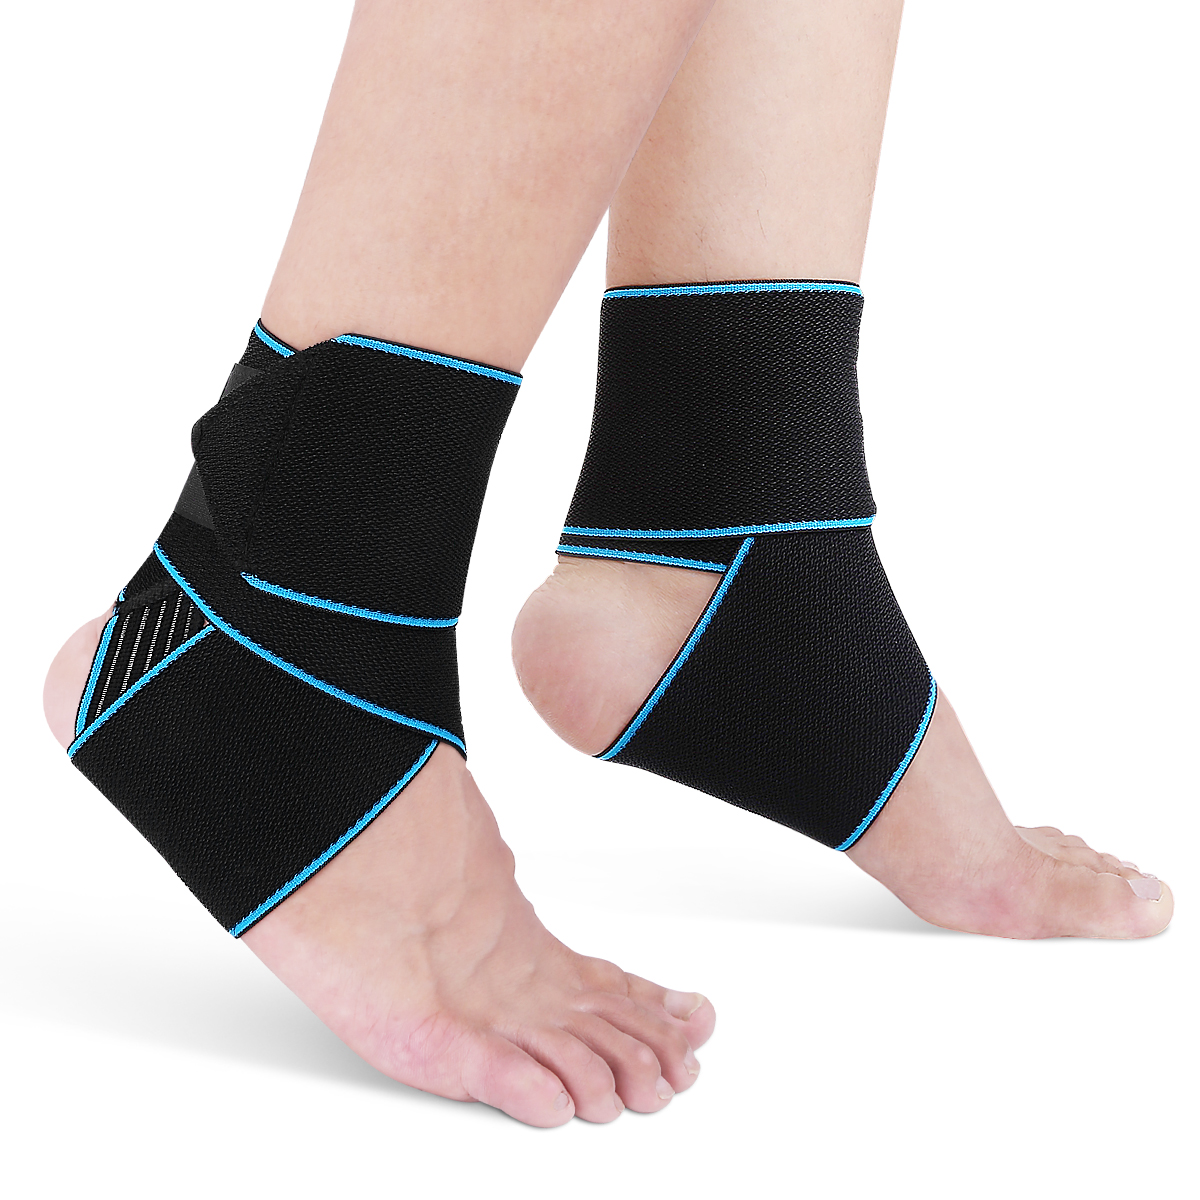  AVIDDA Ankle Brace Support Compression Adjustable, Ankle Support Wrap for Men Women Breathable Foot Support Brace for Plantar Fasciitis, Tendonitis, Joint Pain, One Size Fits All Two Pieces Blue